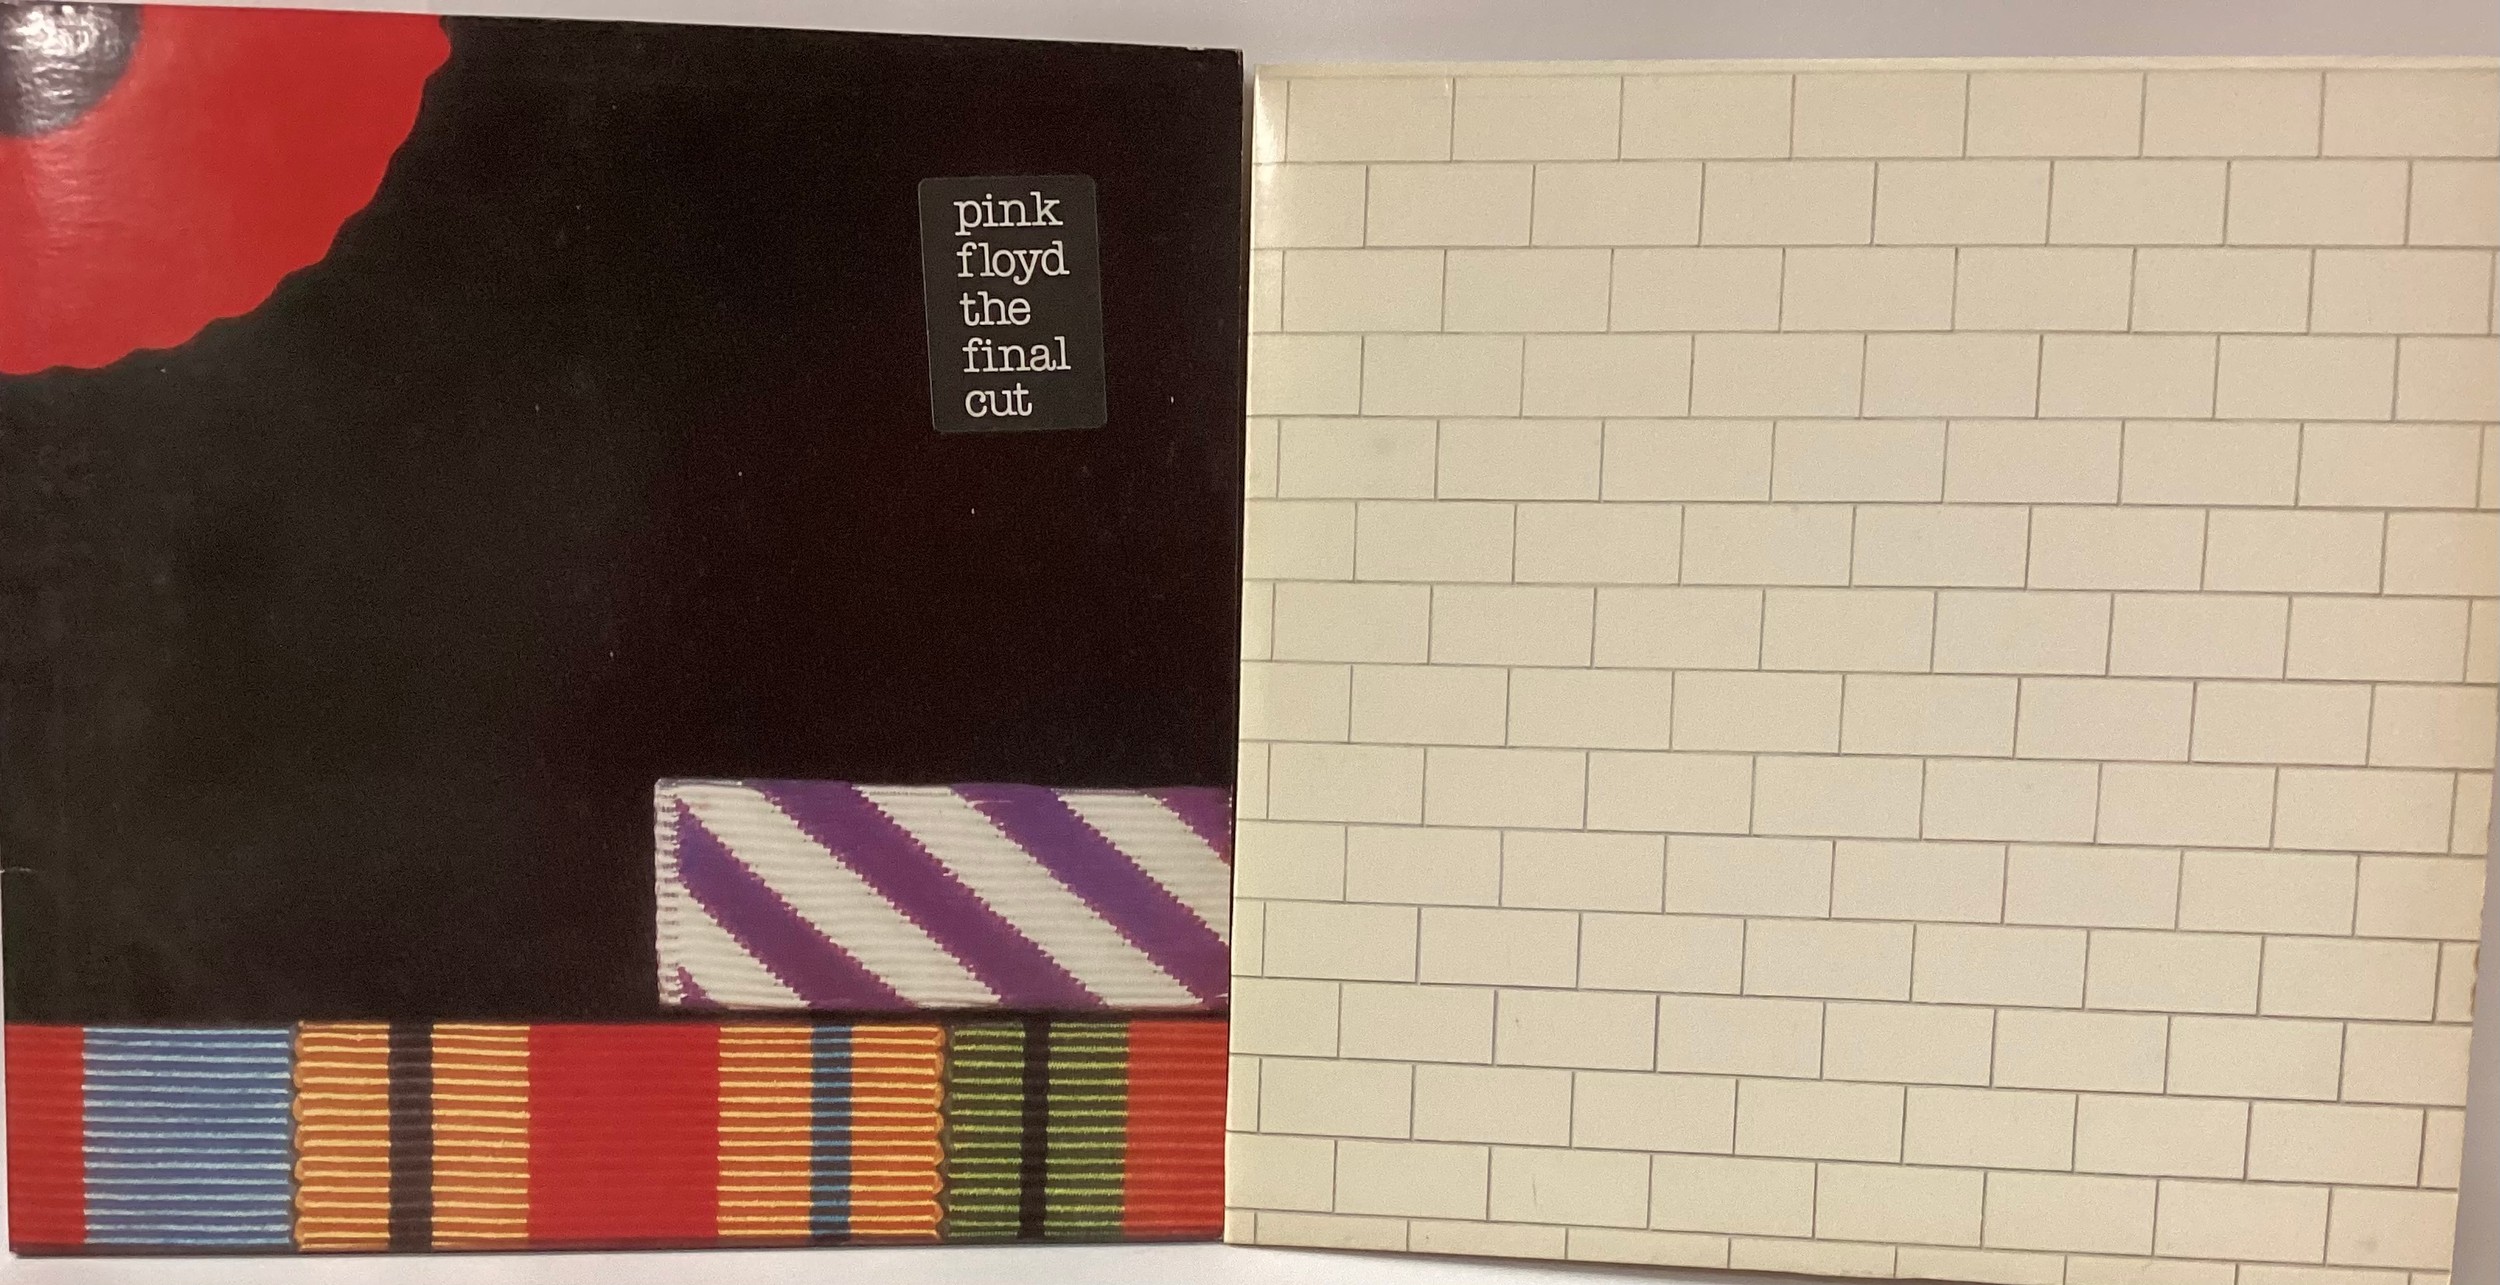 PINK FLOYD VINYL LP RECORDS X 2. Copies here include ‘The Wall’ double album on Harvest SHDW 411